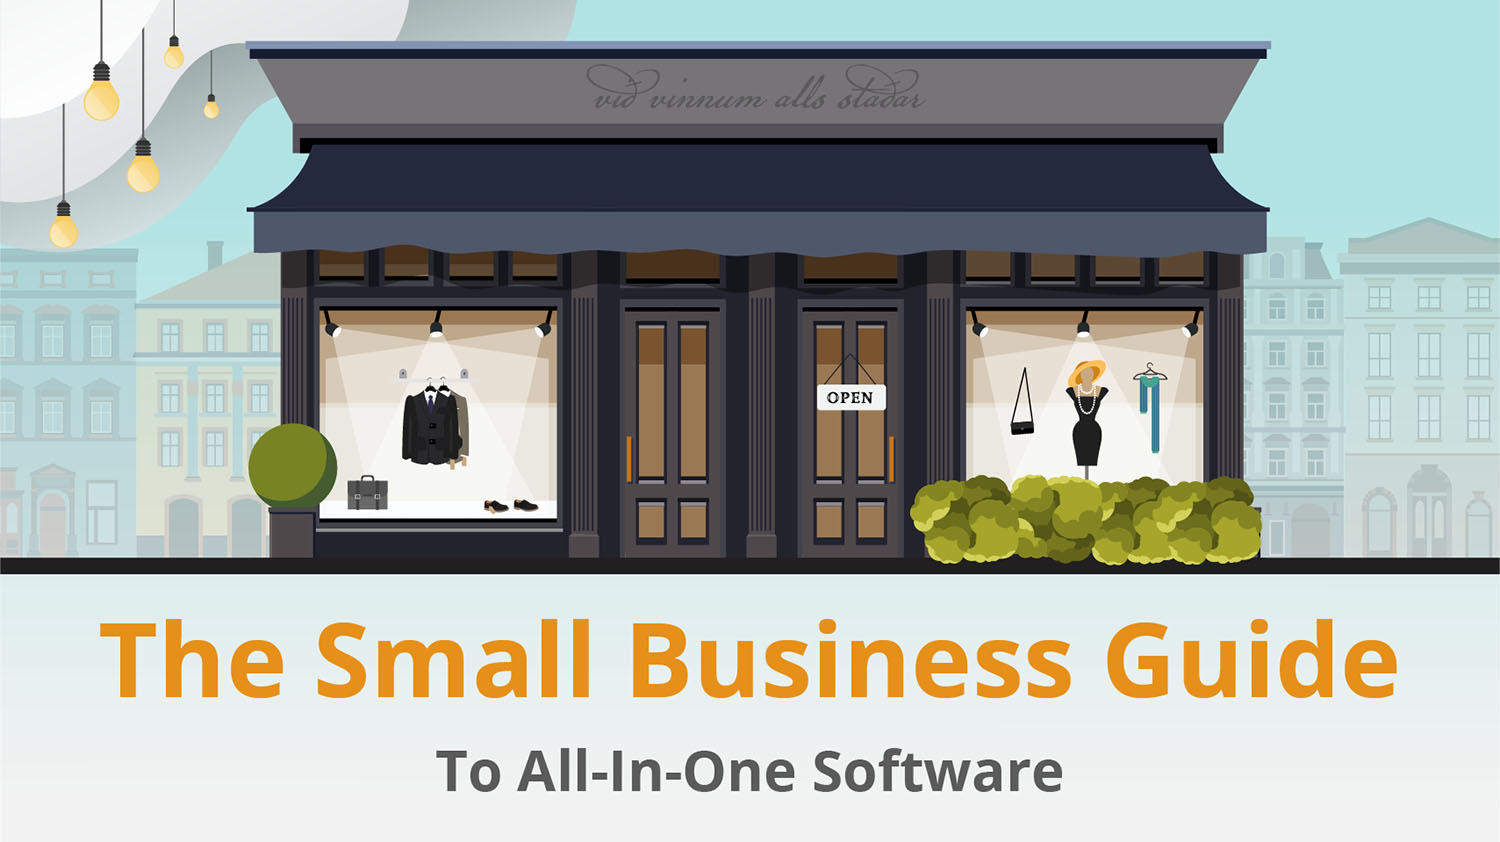 The Small Business Guide to All-In-One Software cover with small business storefront, open sign, clouds with lightbulbs and Striven logo